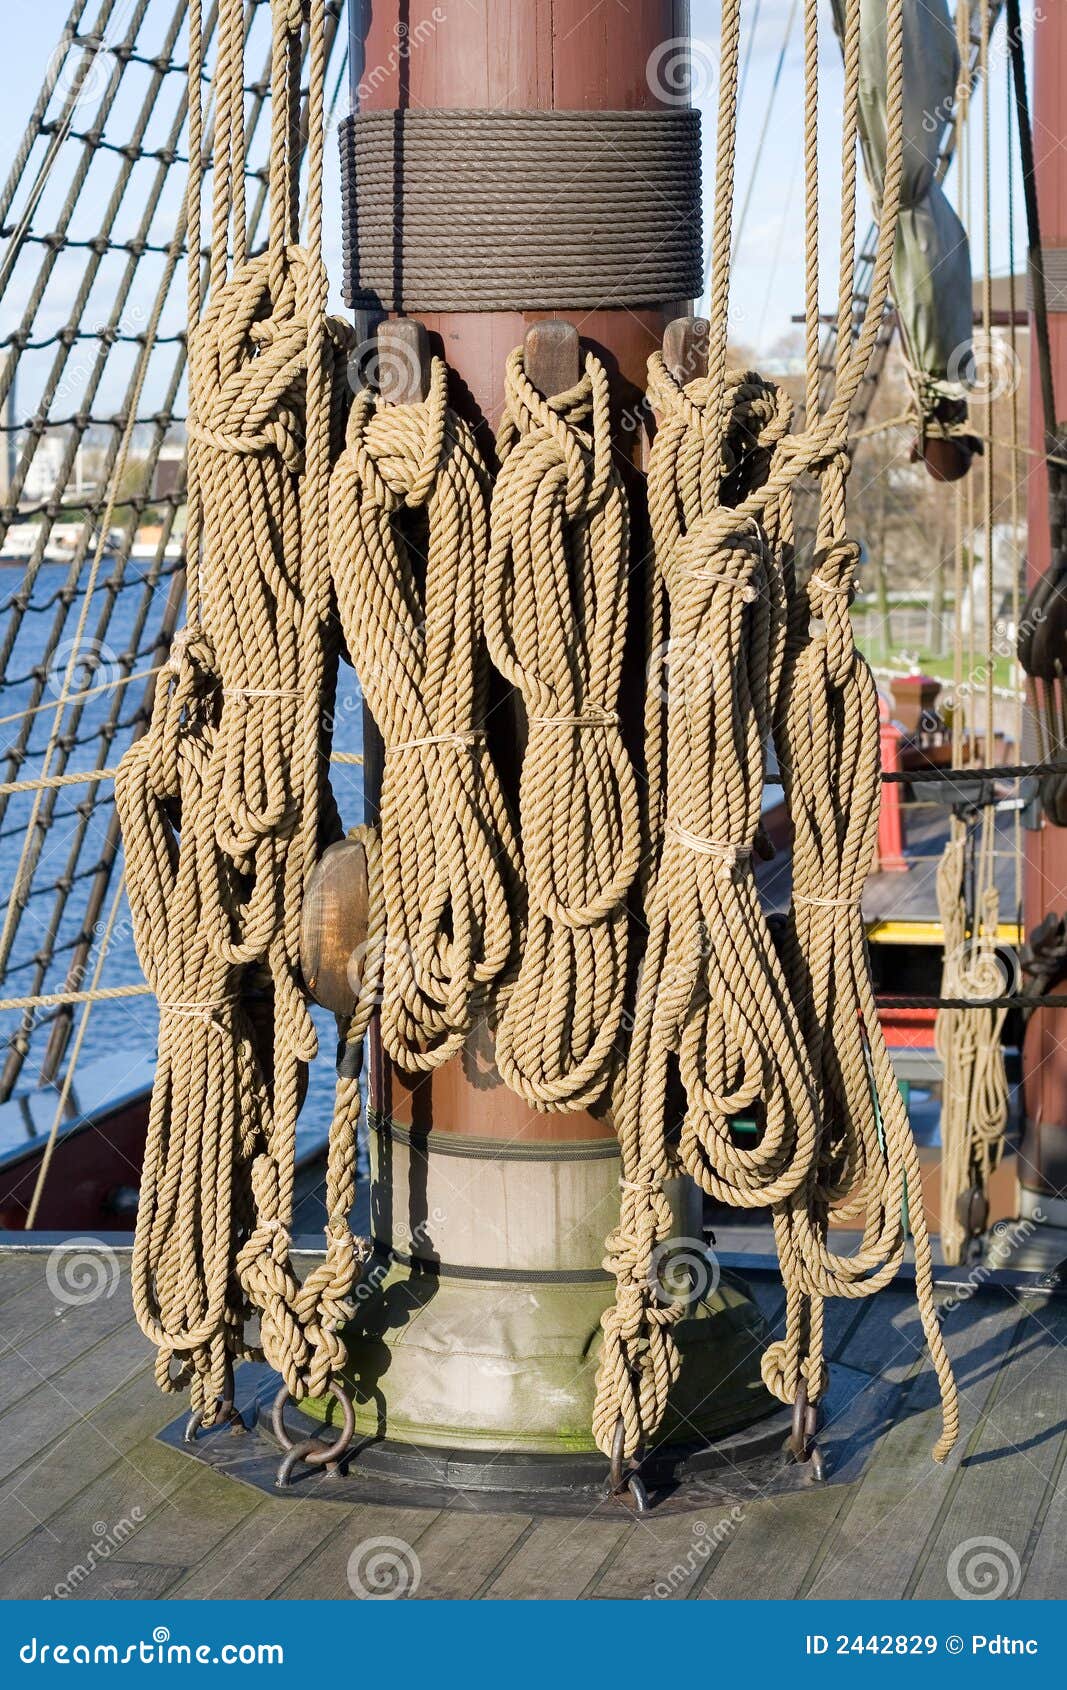 Tall Ship Rigging stock image. Image of knots, rigging ...